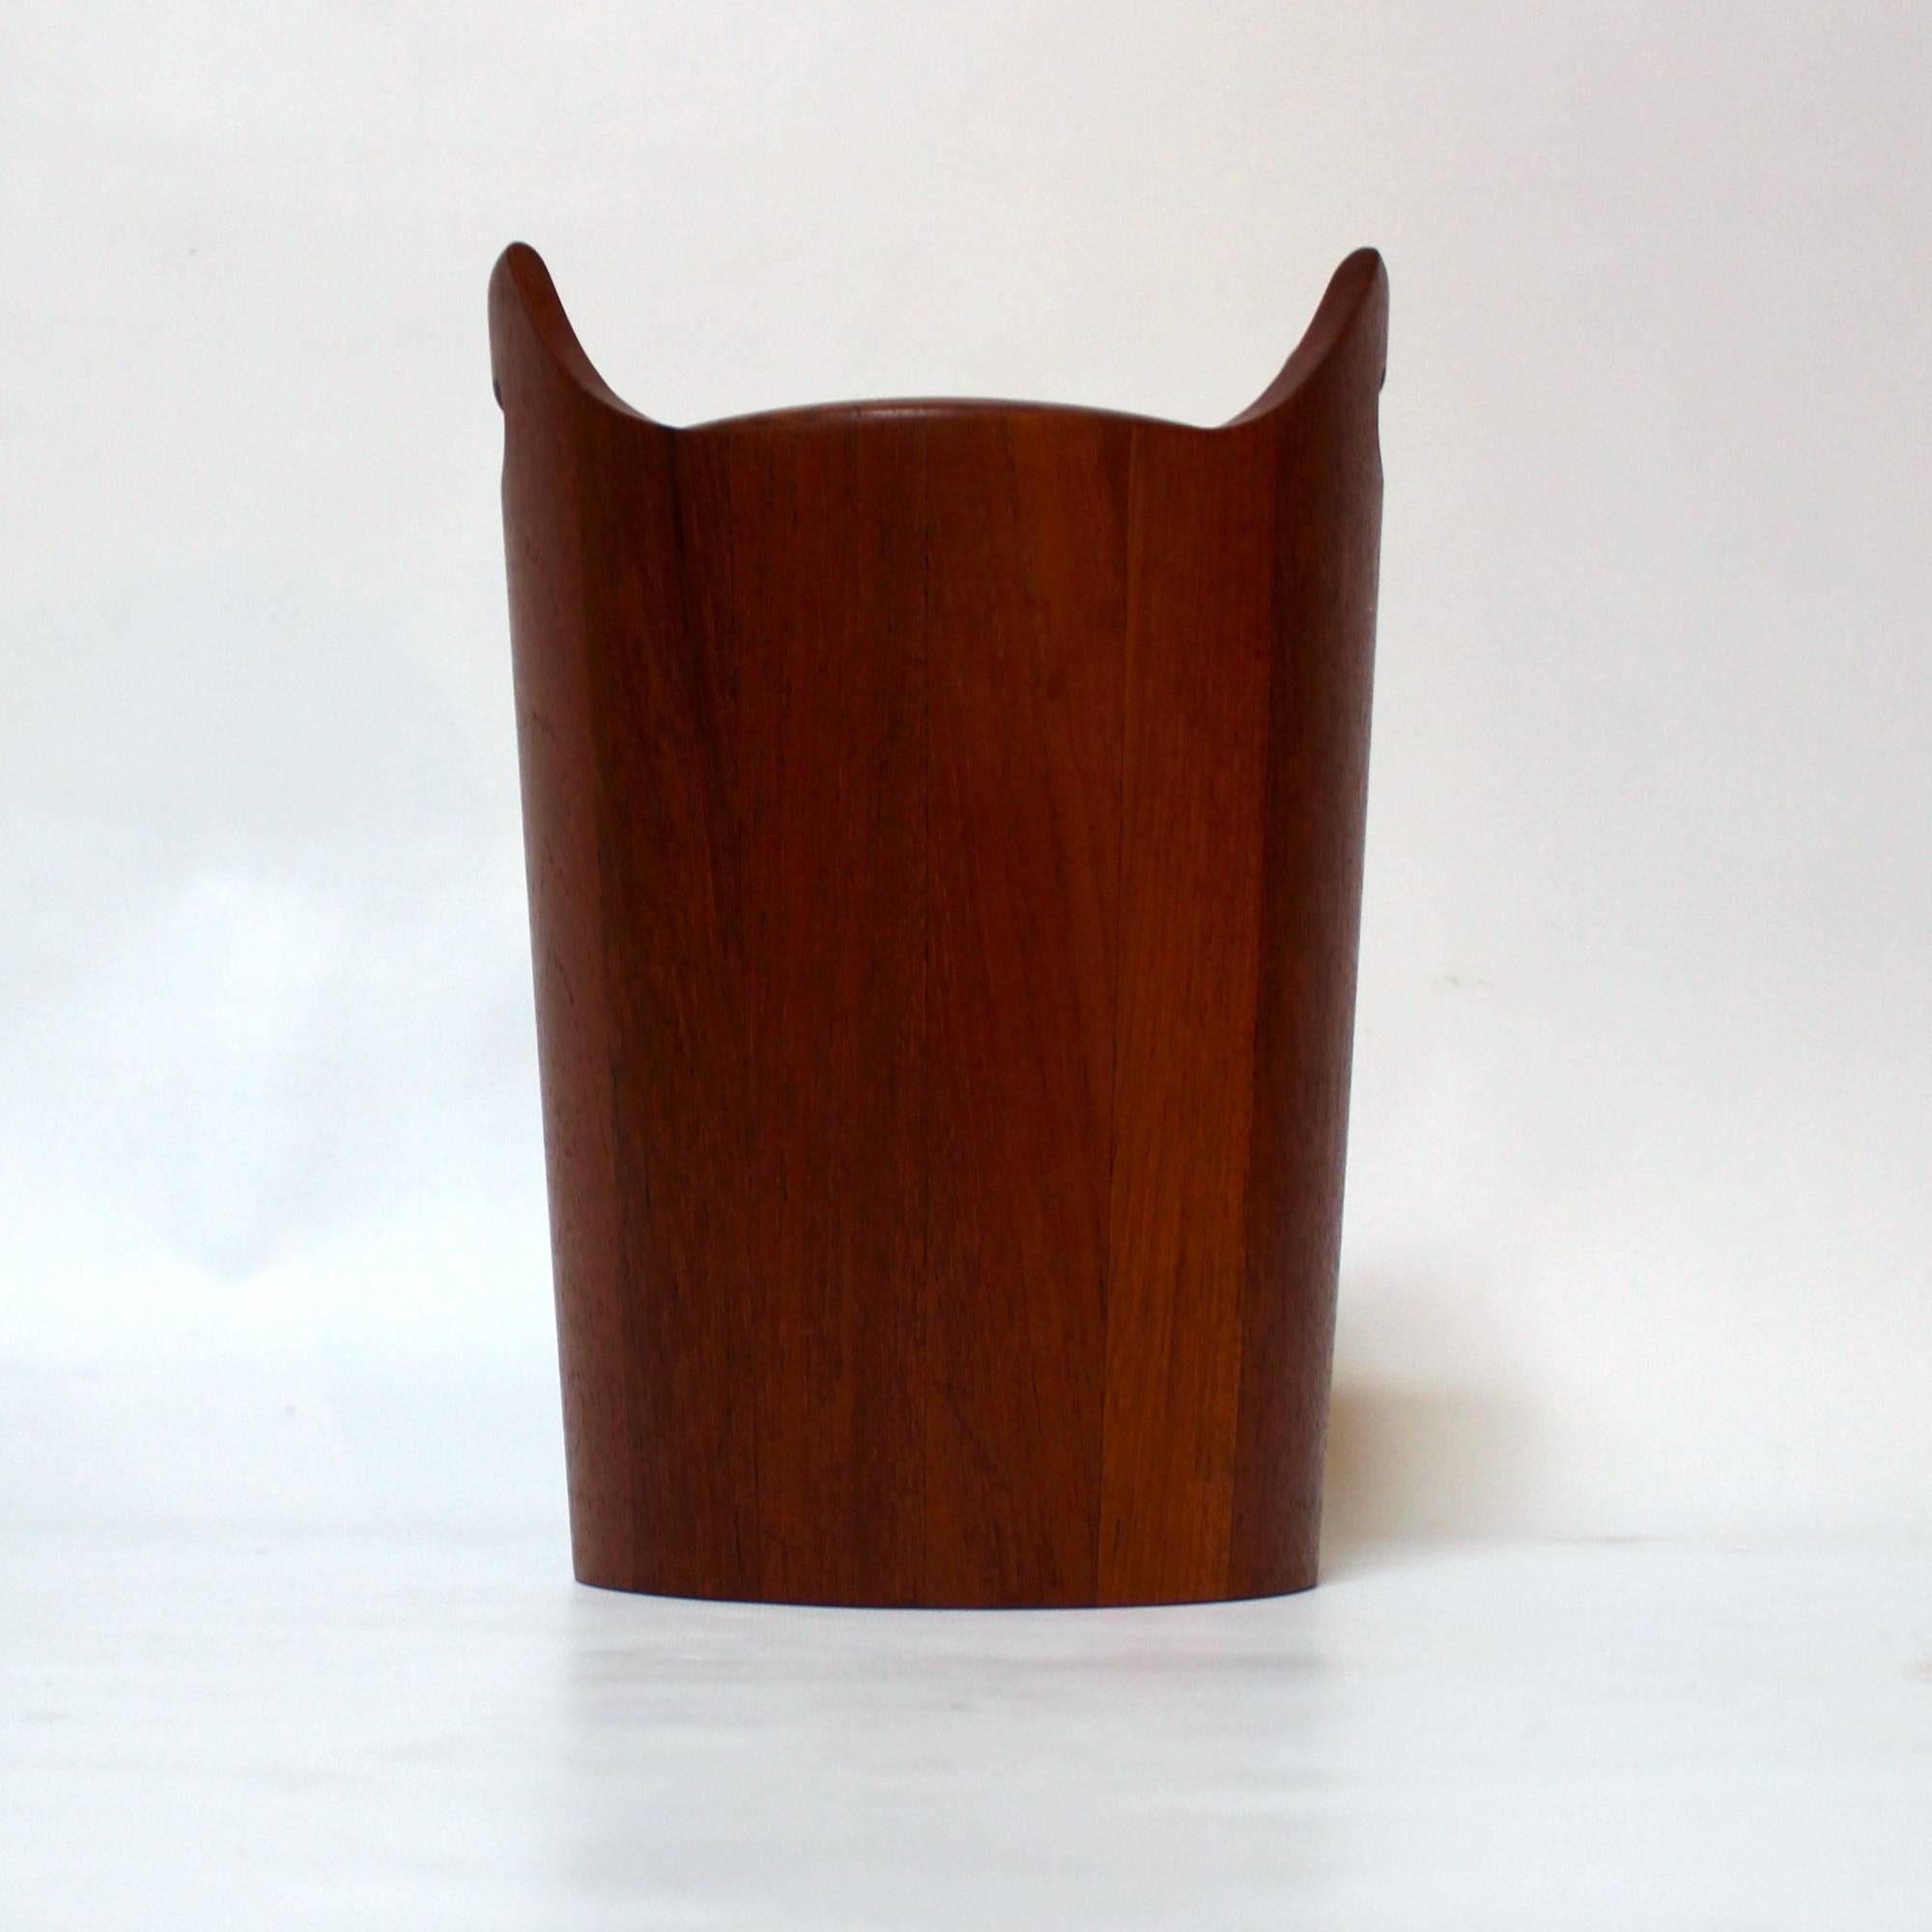 1960s Danish Modern teak ice bucket with removable plastic liner. Marked 